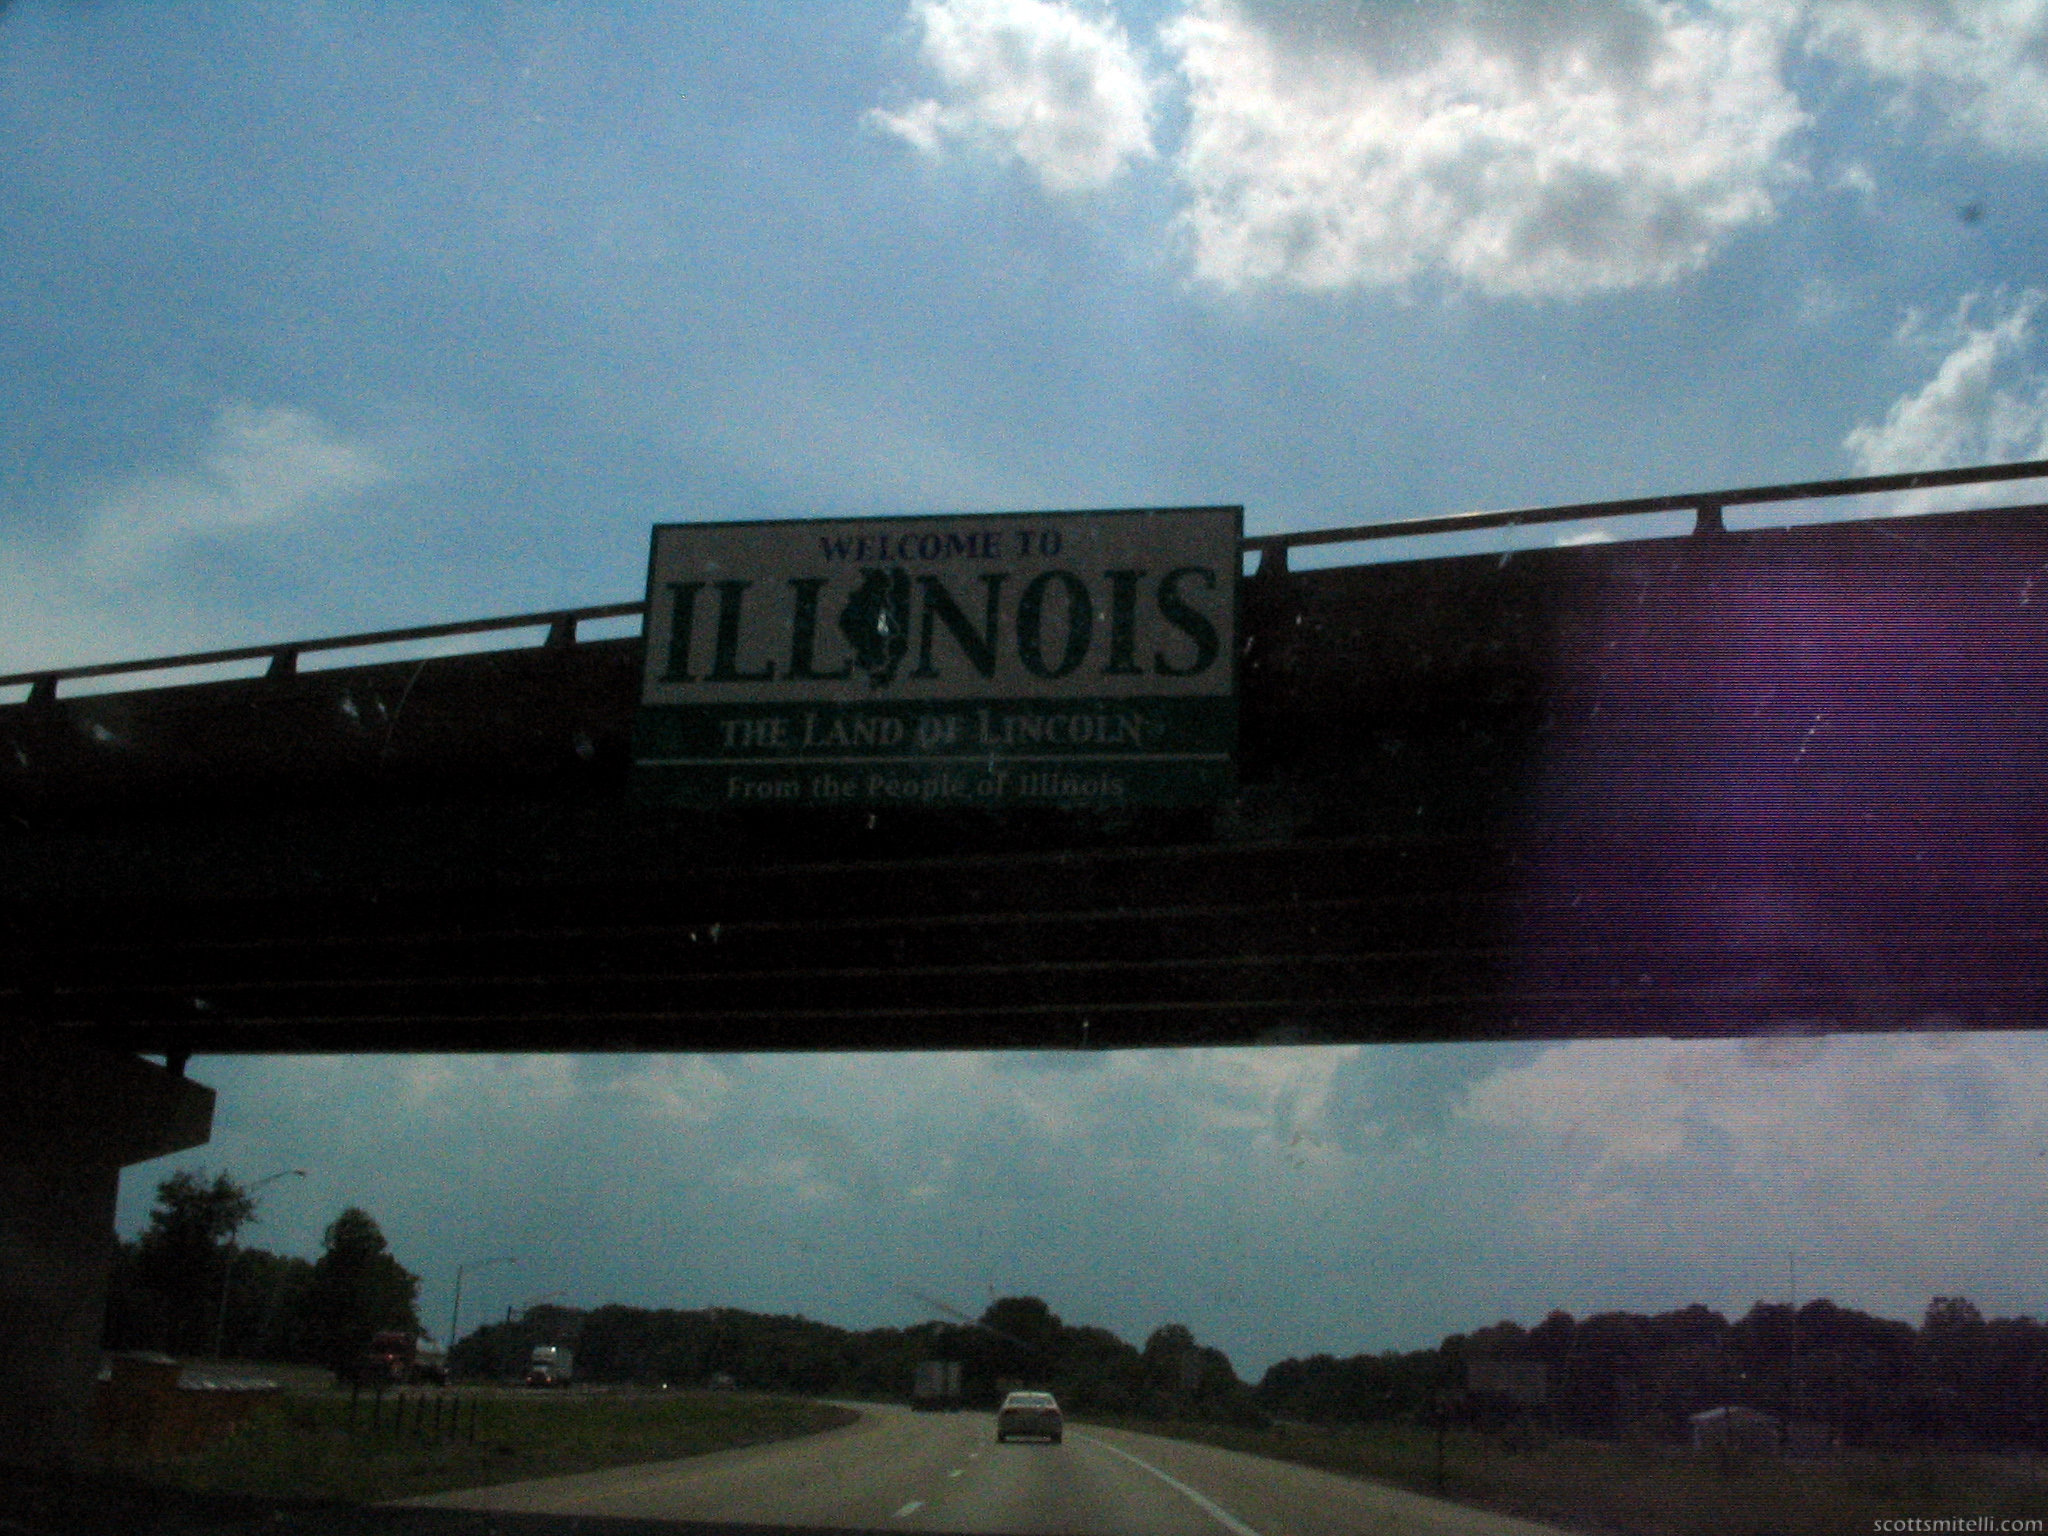 Illinois. Also, my CCD is wigging out.